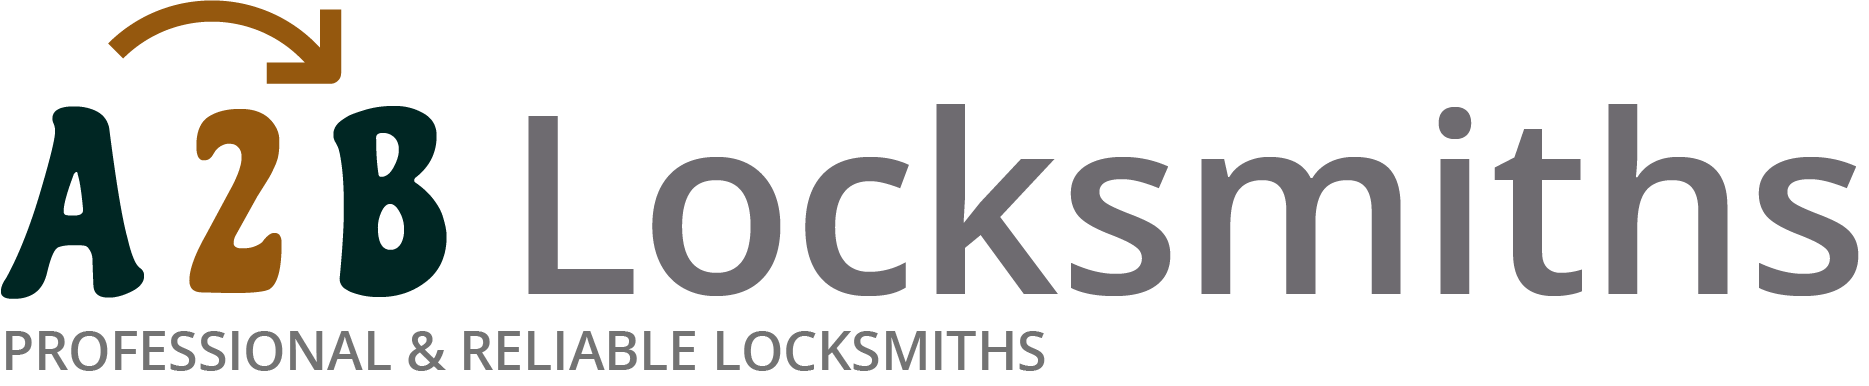 If you are locked out of house in Loughborough, our 24/7 local emergency locksmith services can help you.